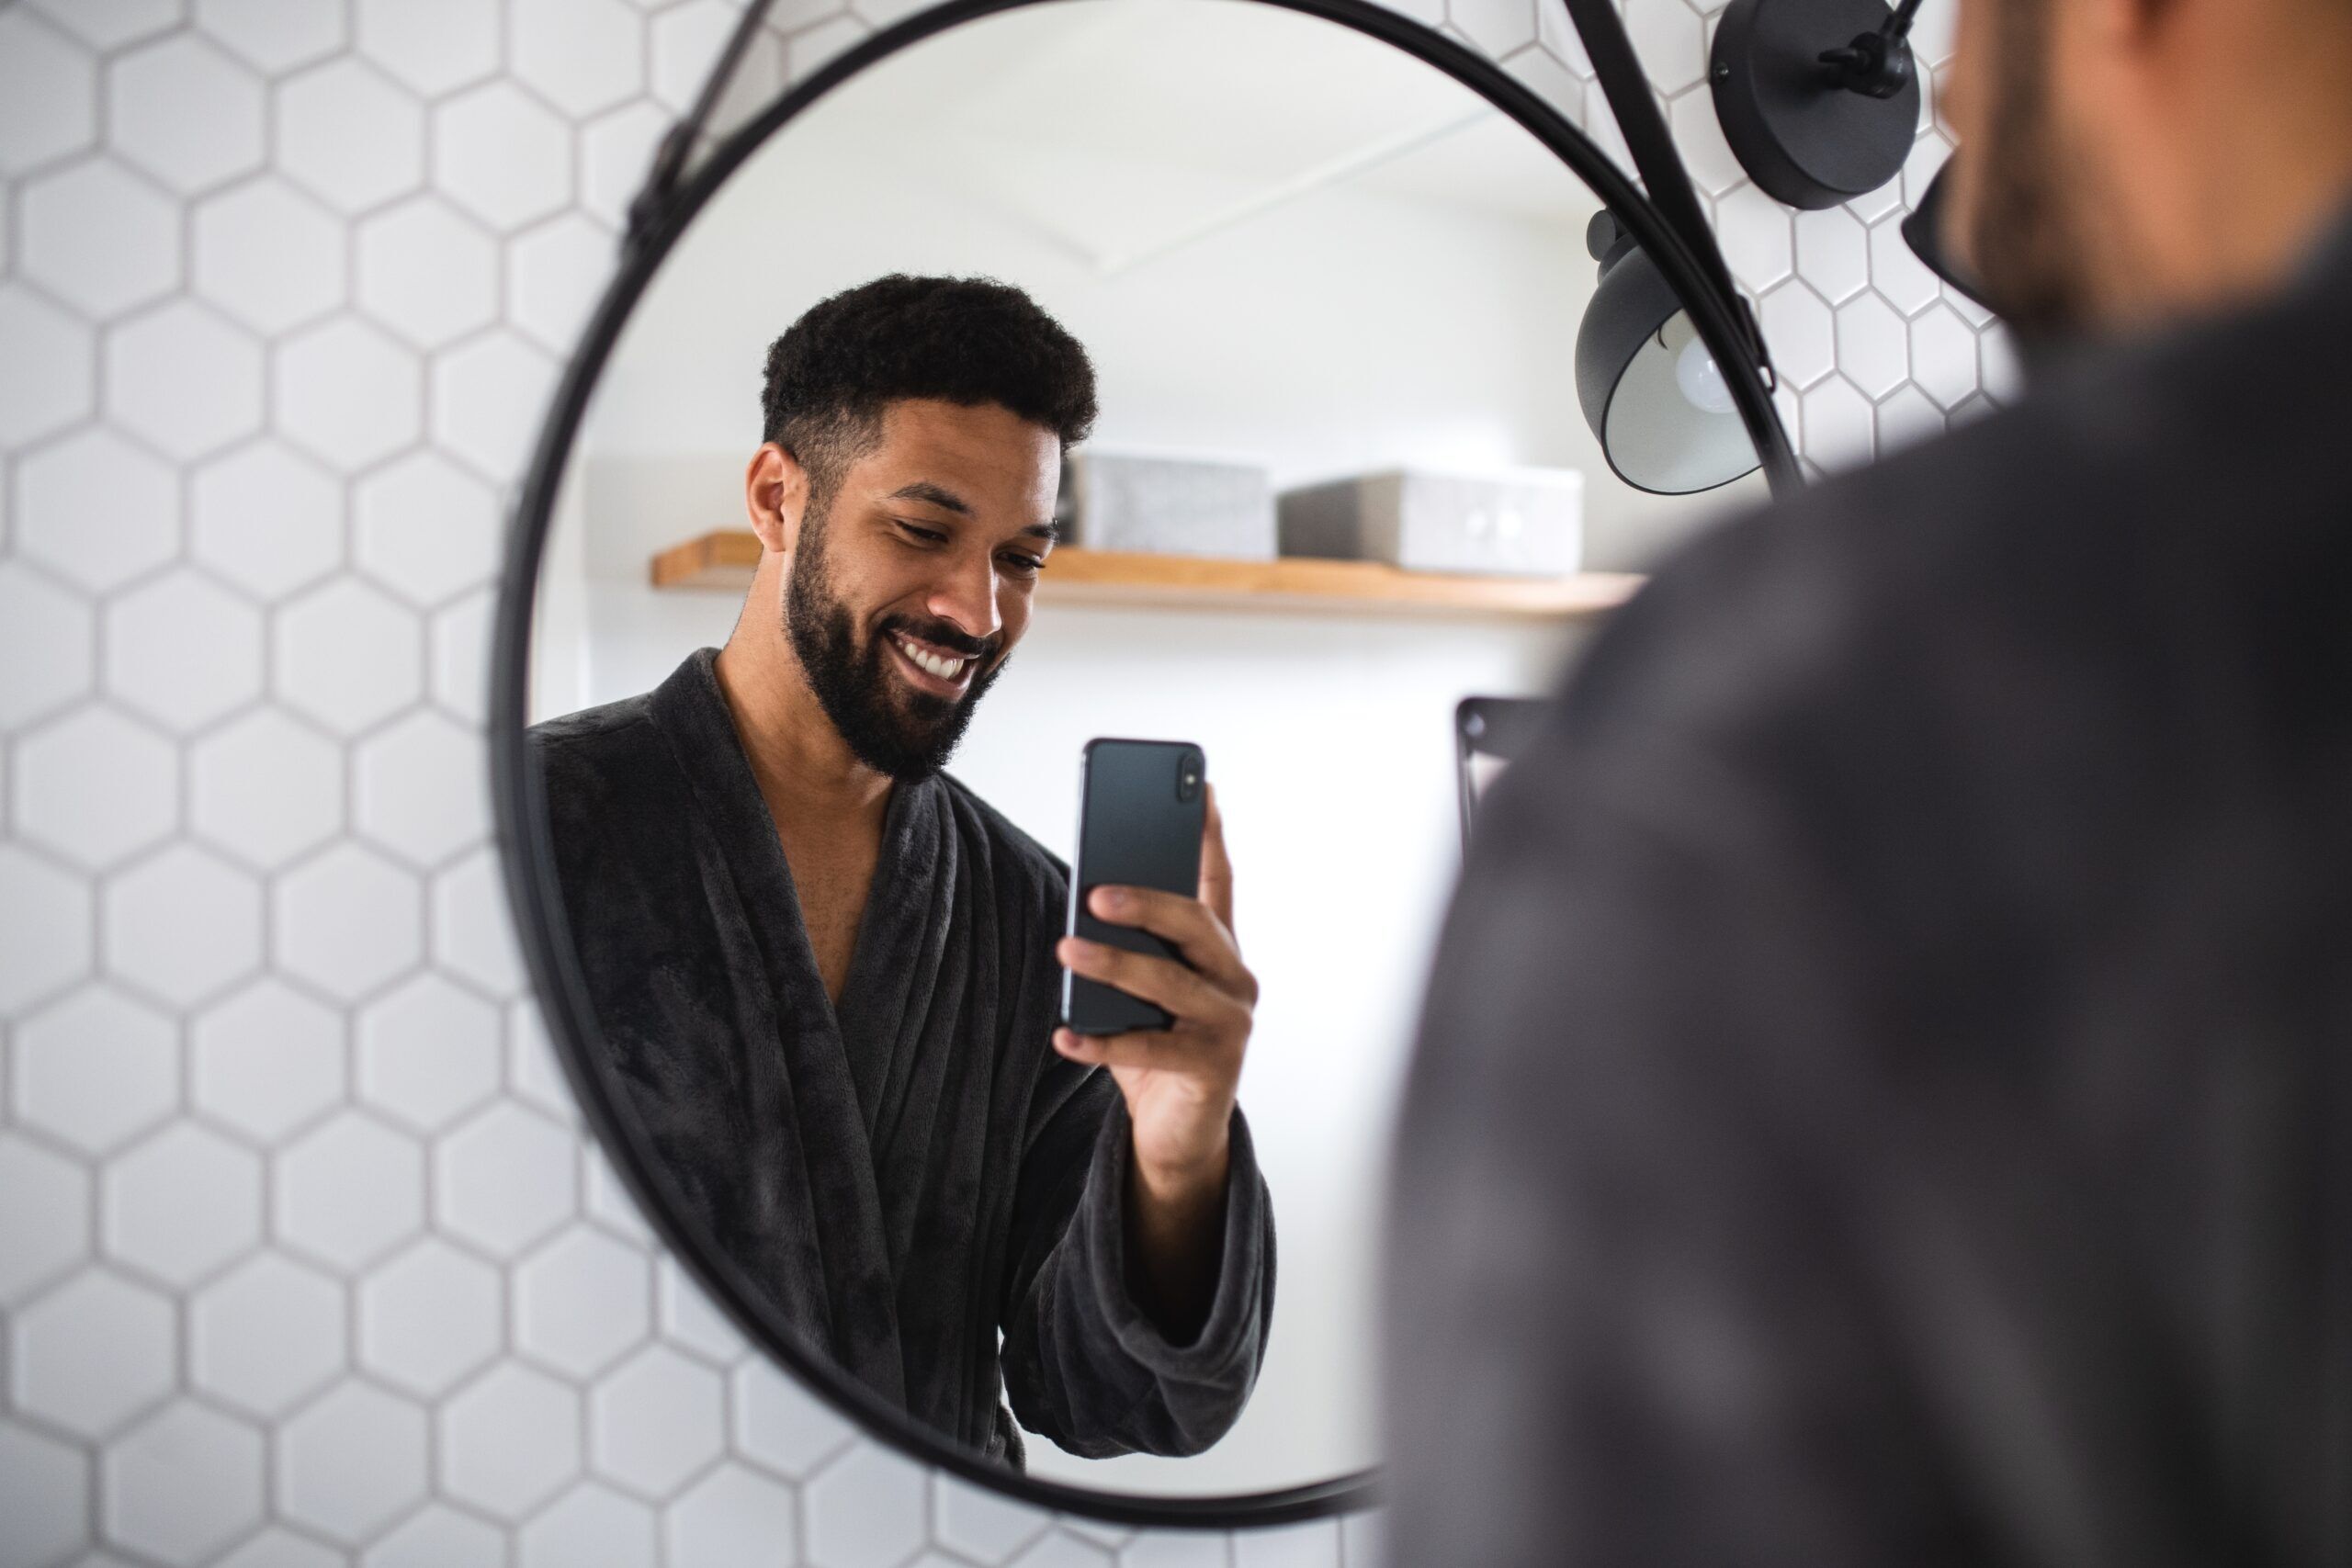 86 Mirror Selfie Captions That Reflect Your True Self - Yahoo Sports